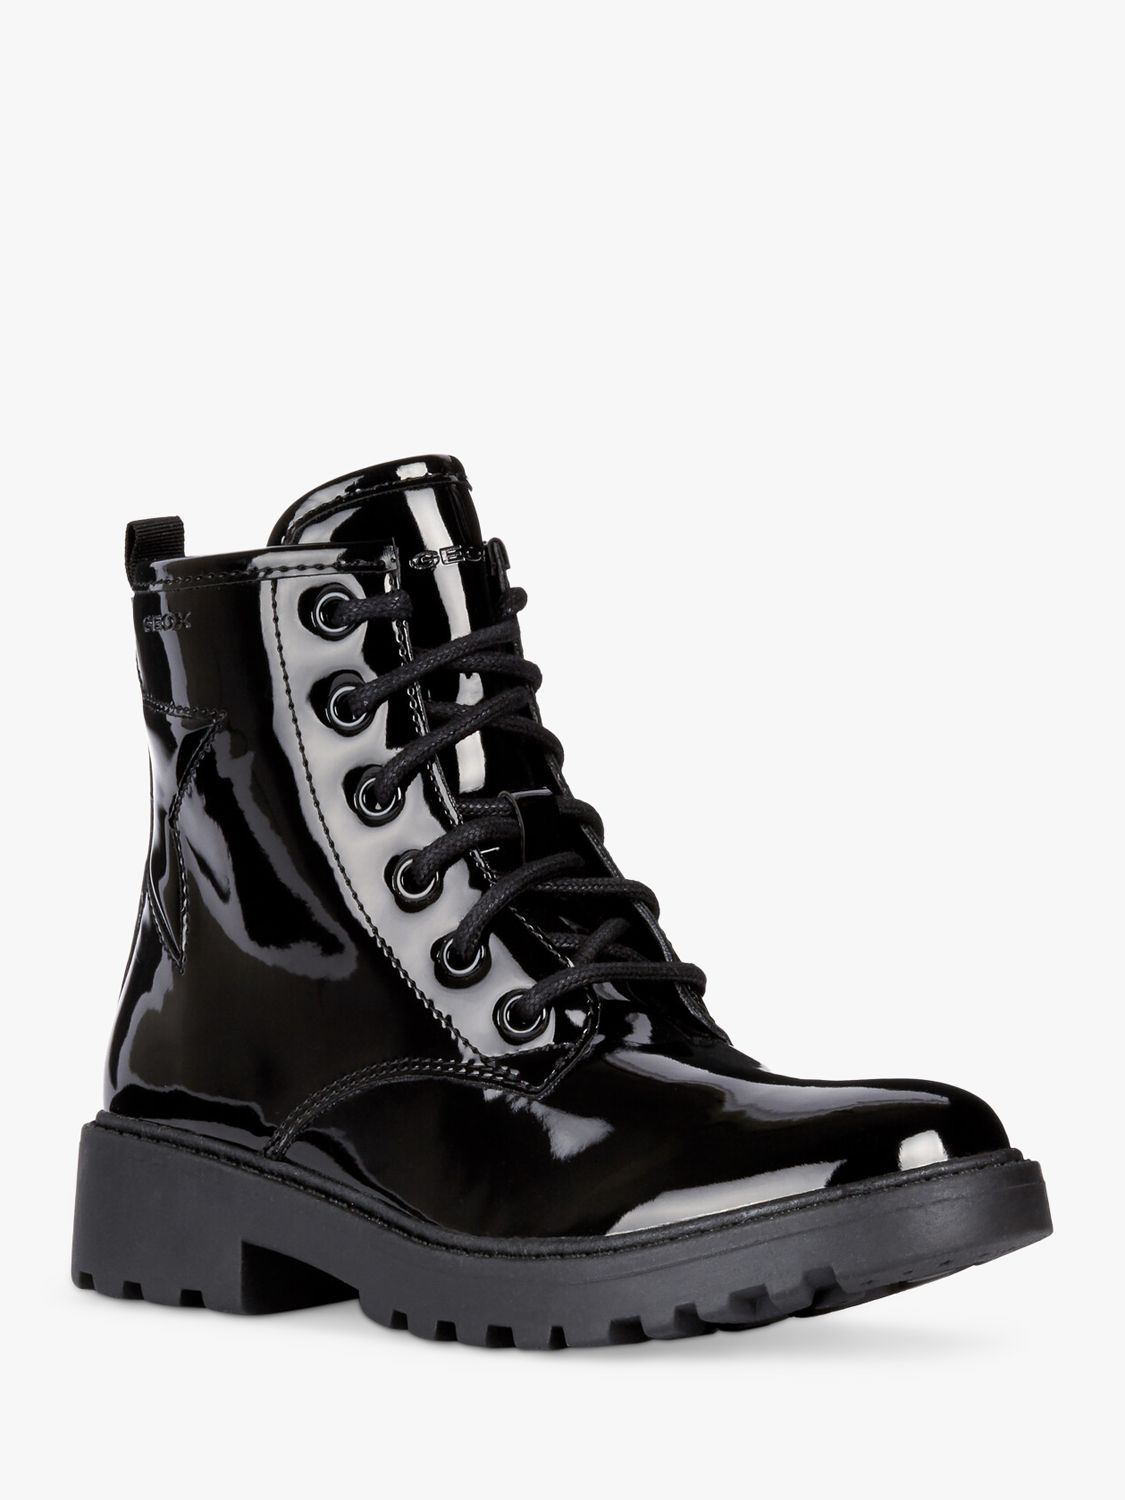 Geox Kids' Casey Patent Ankle Boots, Black at John Lewis & Partners